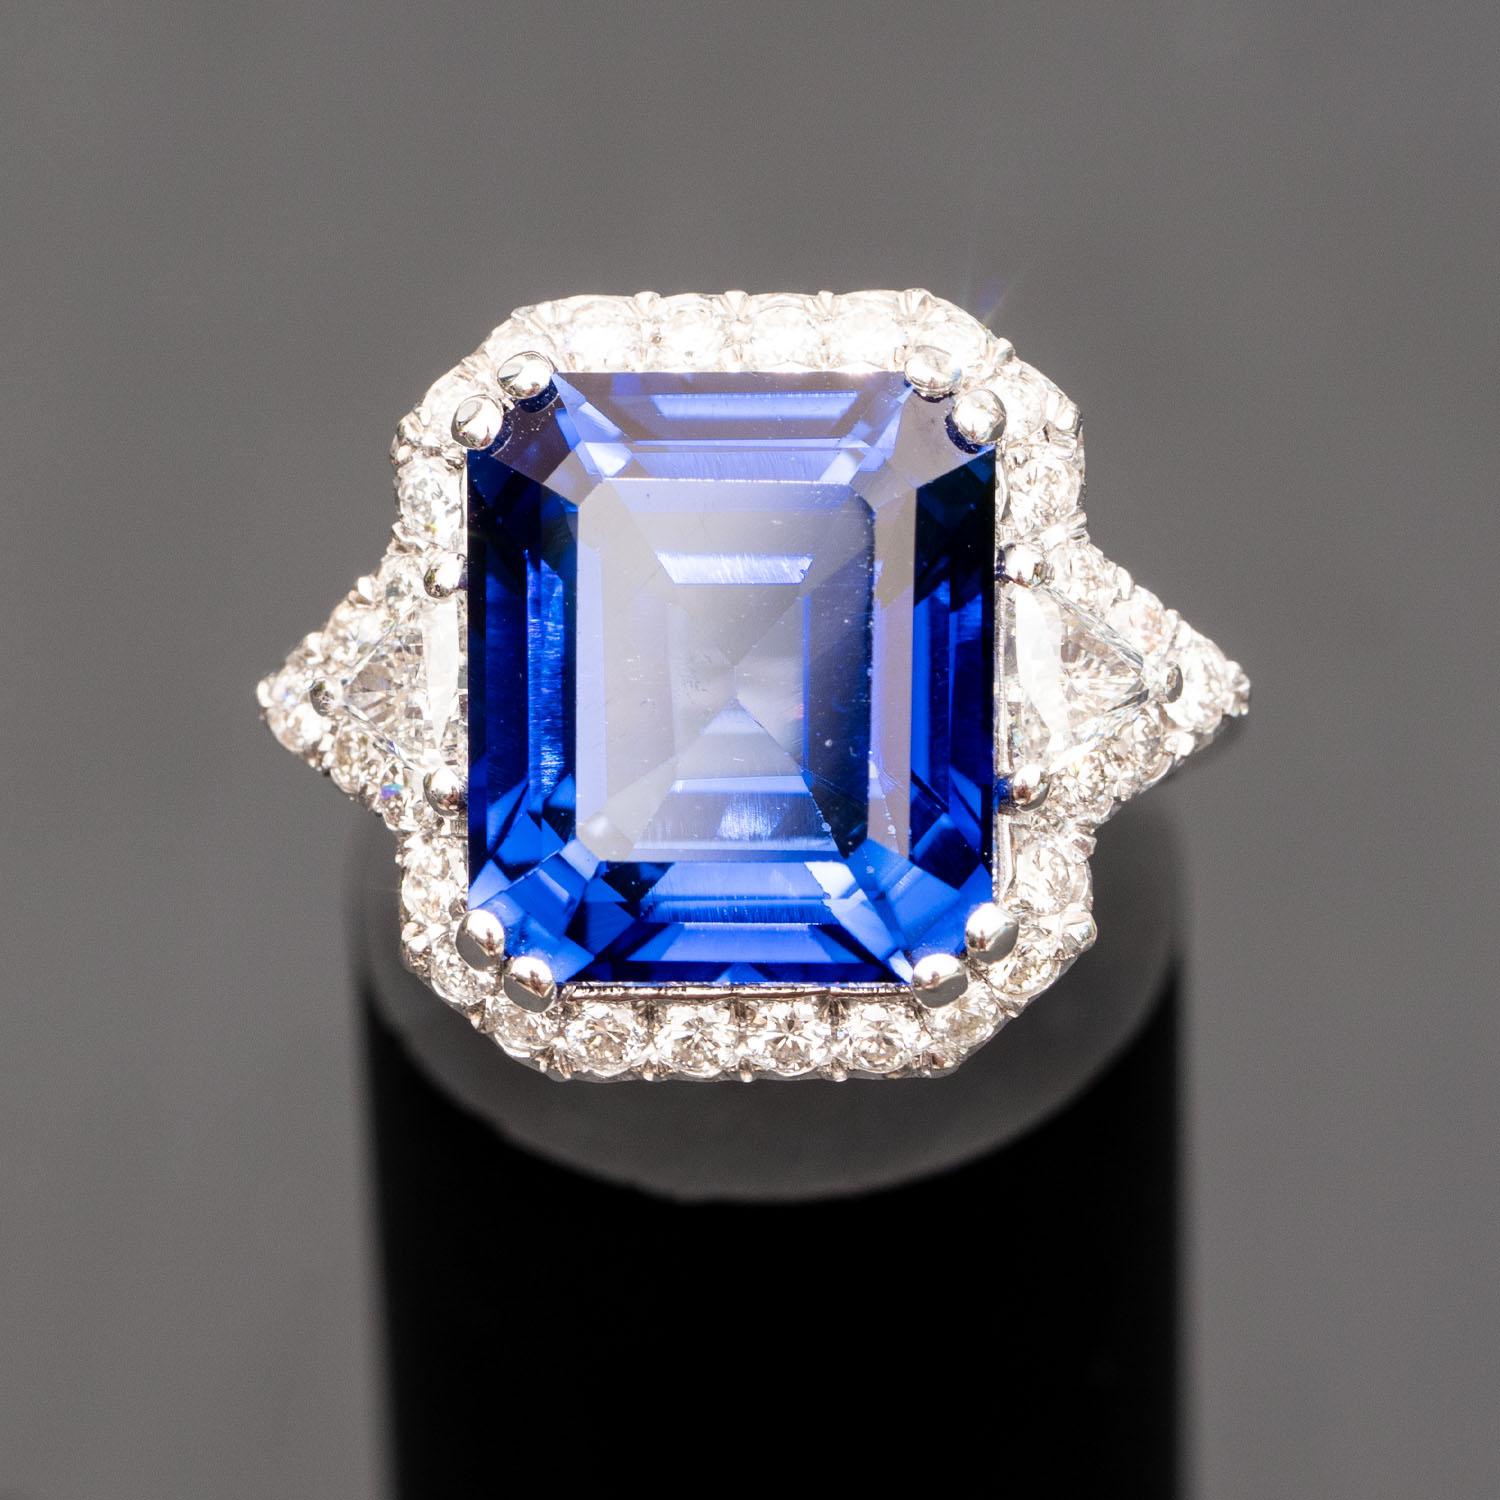 This gorgeous blue sapphire ring will impress everyone around you. It features a large emerald 13.70 carat gemstone, adorned with 1.20 carat natural diamonds.

Diffused Sapphire
Mineral: Corundum
Hardness: 9 on Moh's scale
Emerald Sapphire